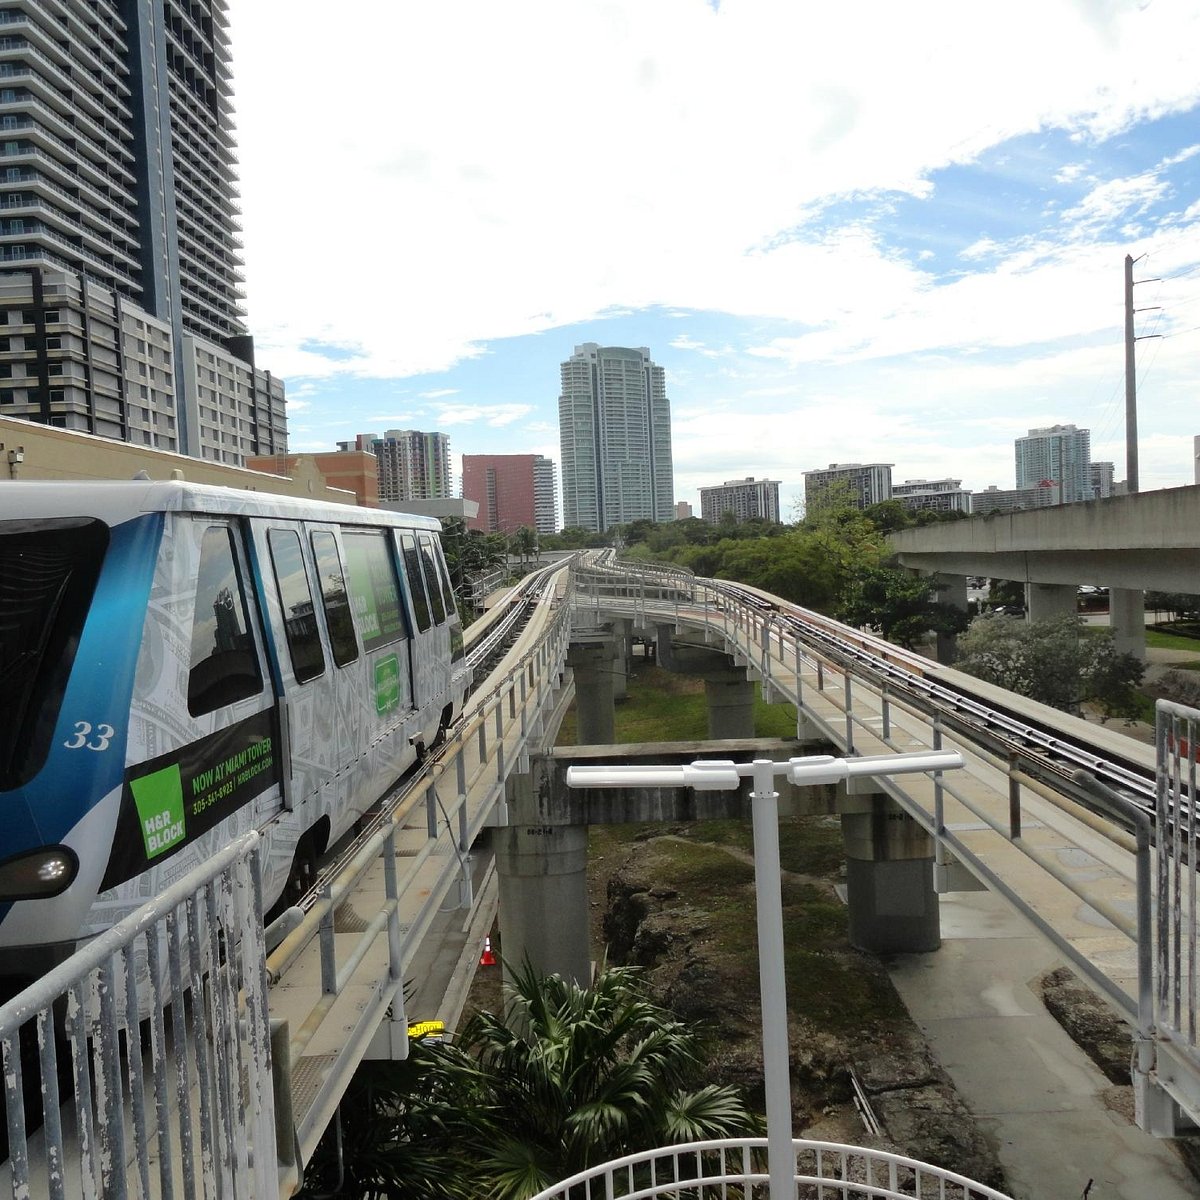 How to get to Sawgrass Mall in Miami by Bus, Subway or Light Rail?